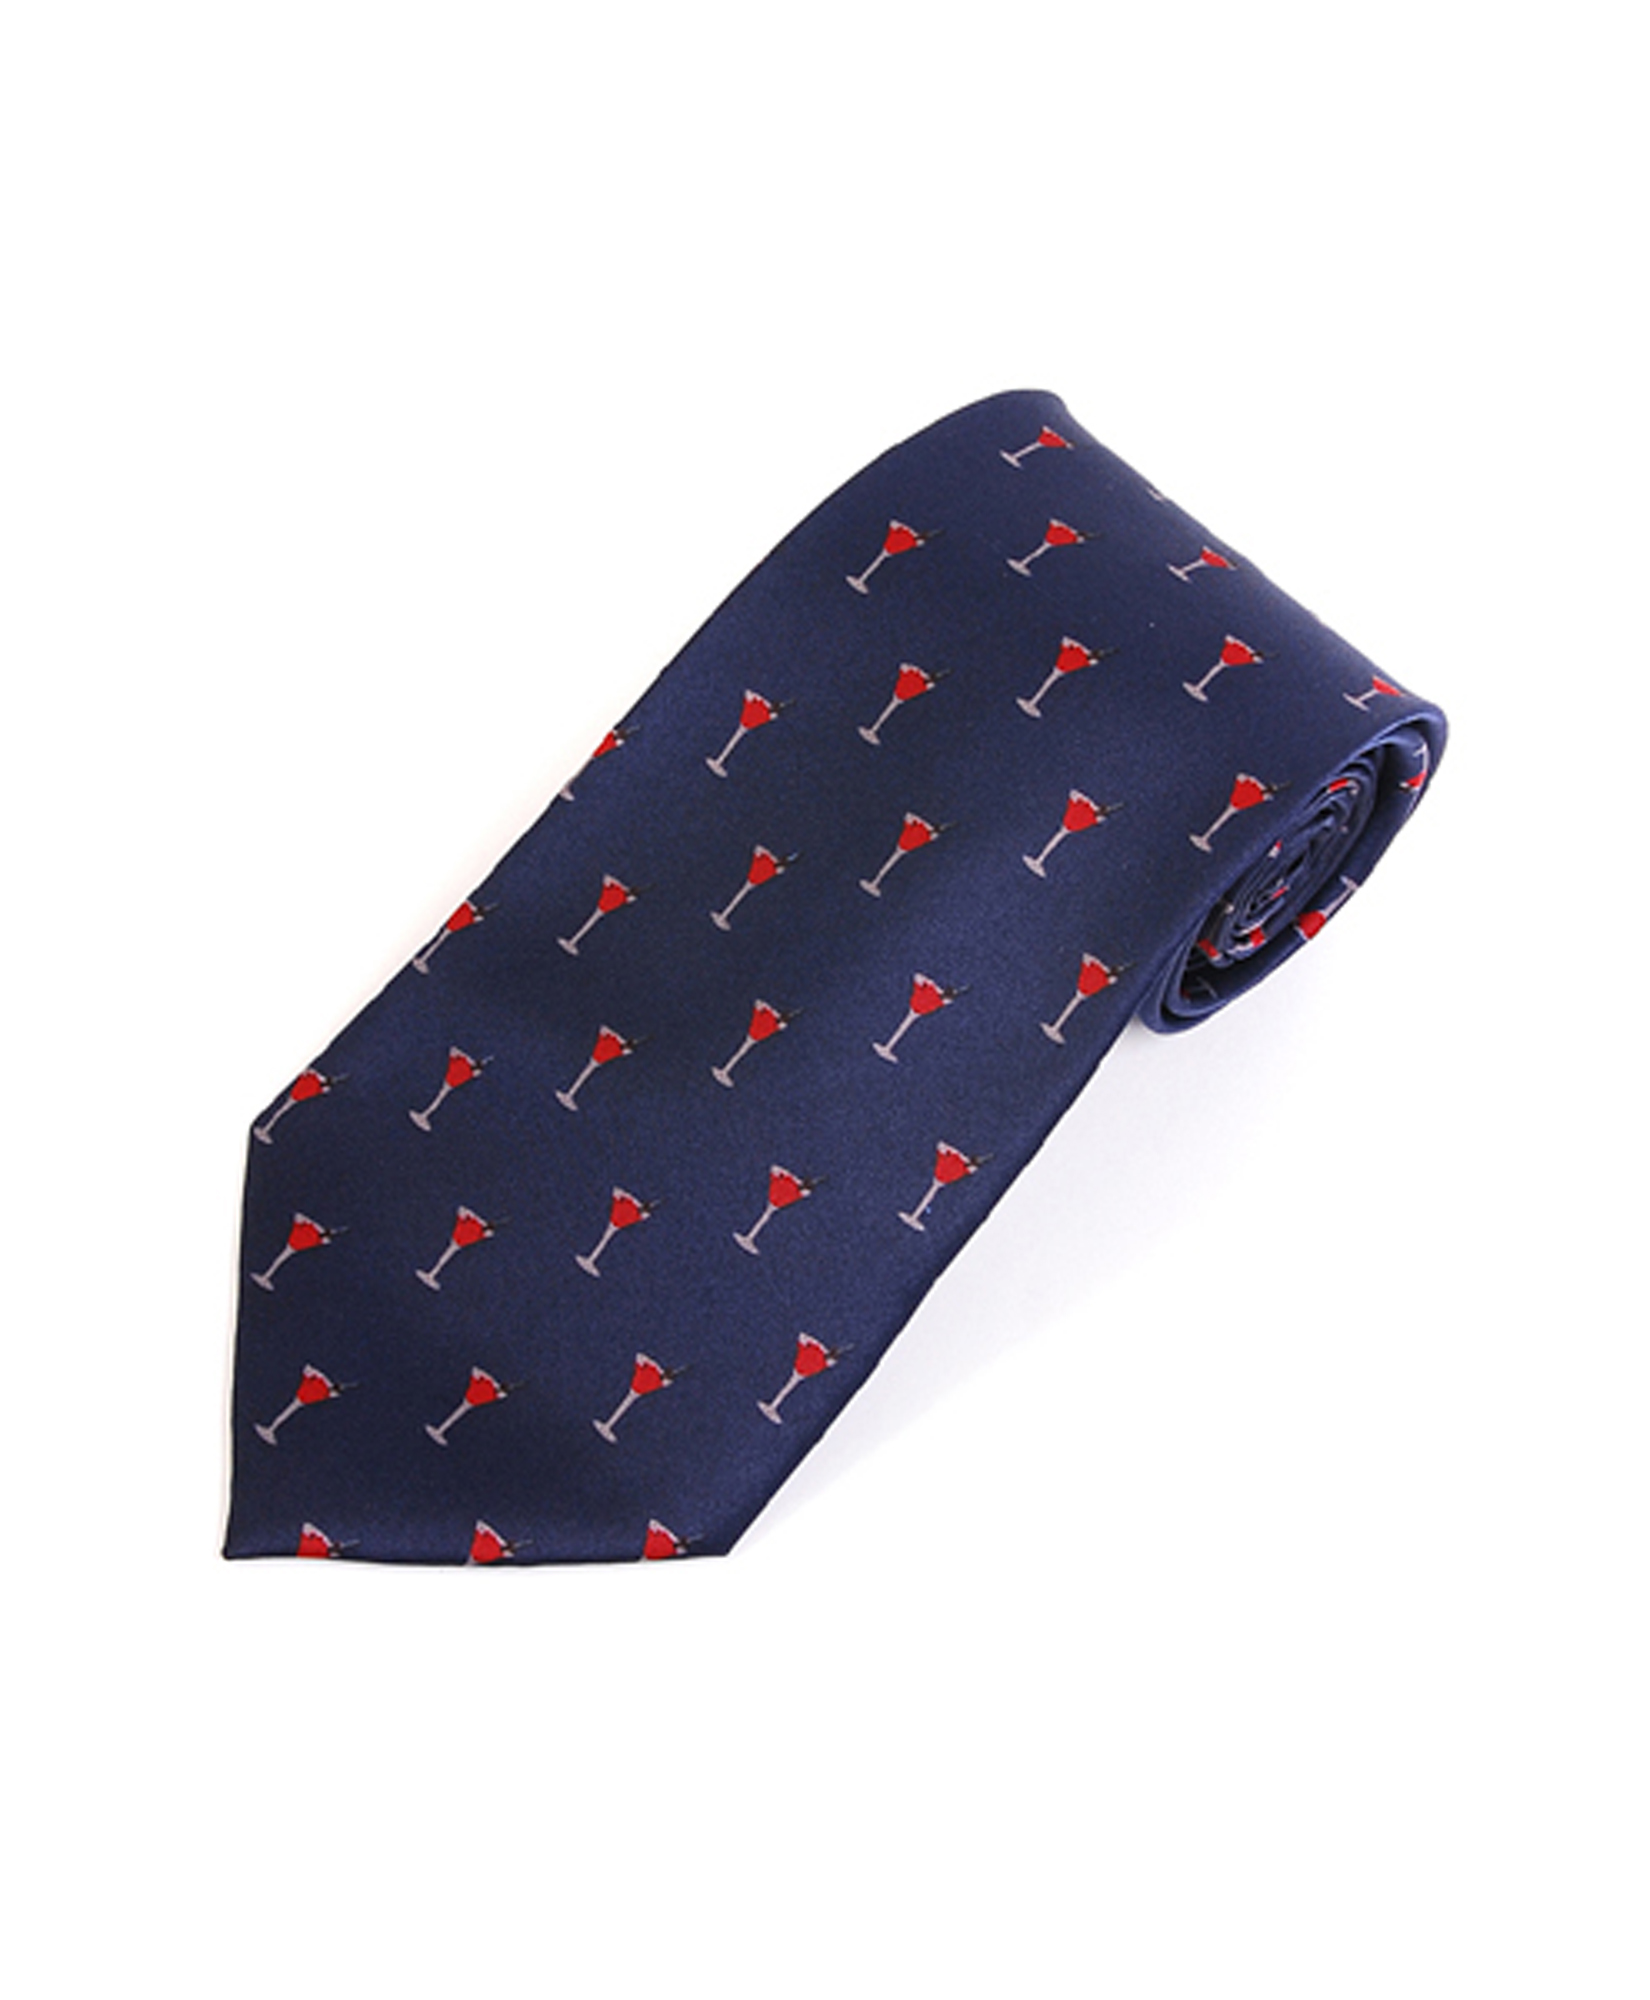 "Cocktail" Novelty Tie